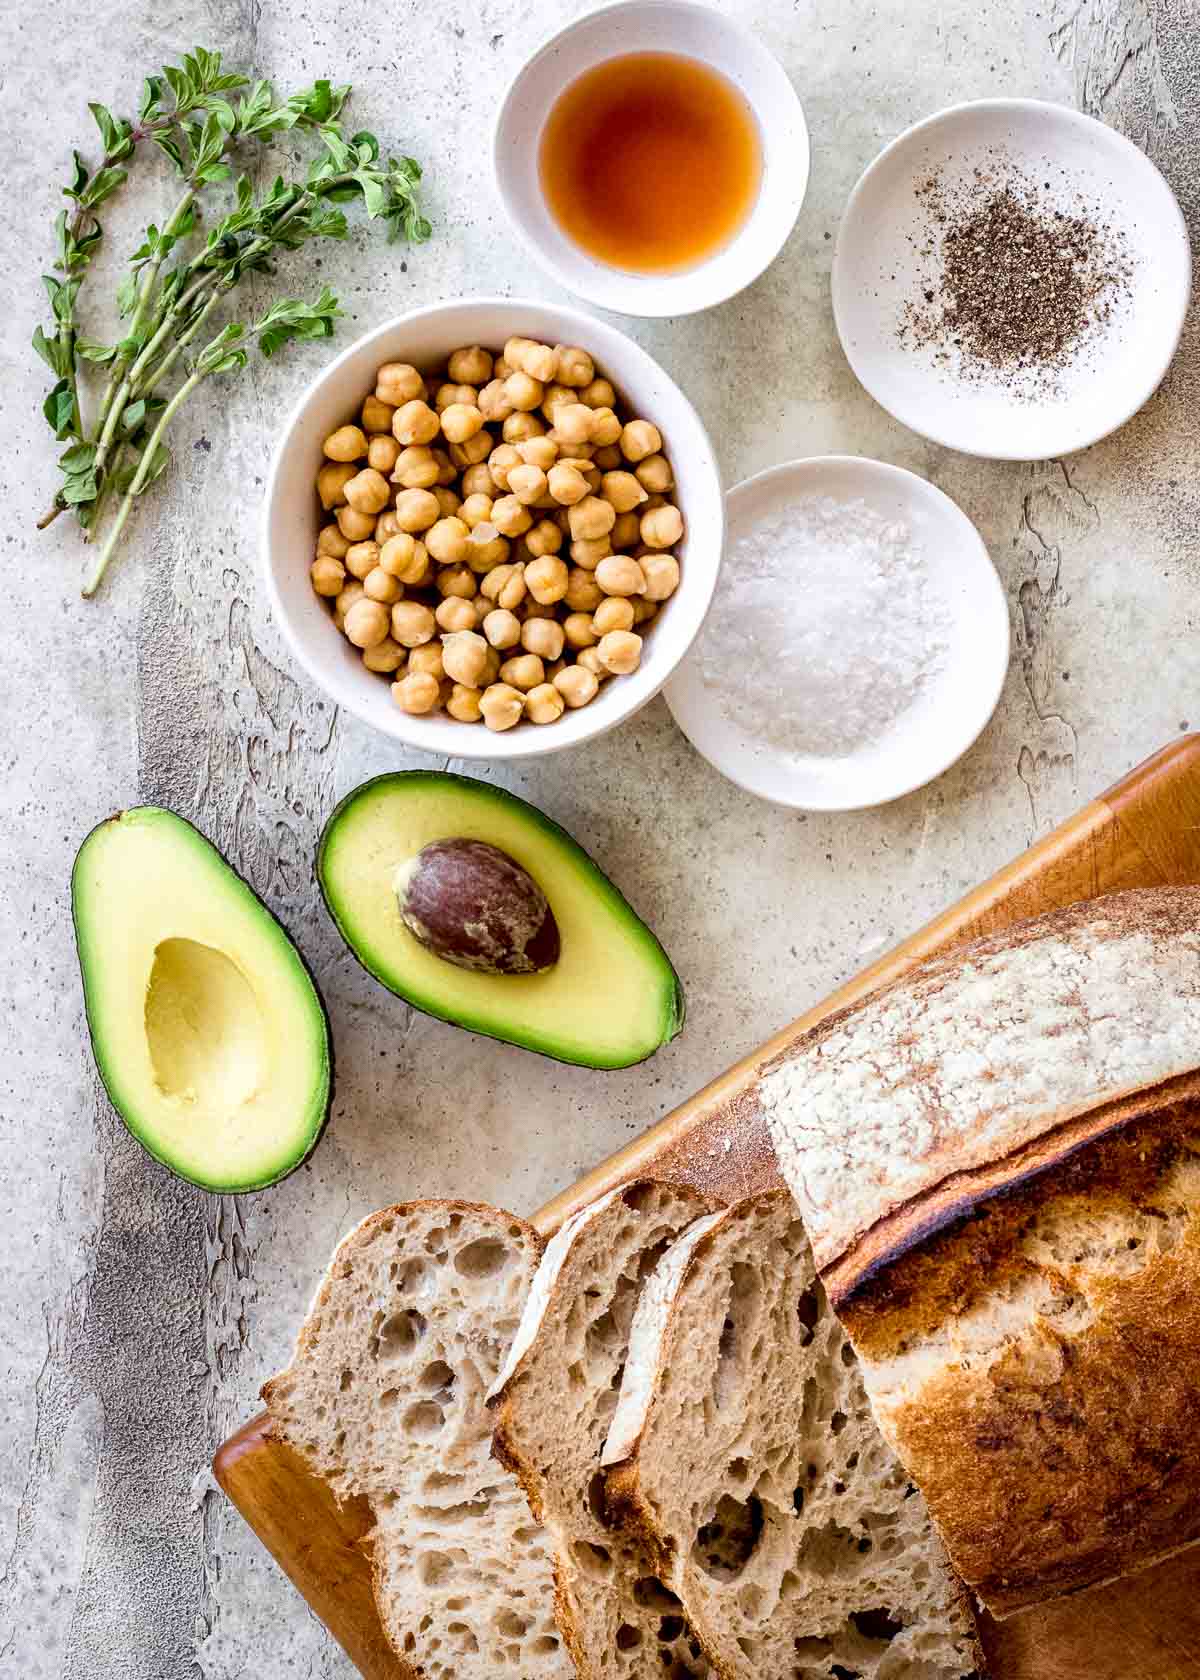 Ingredients for high protein vegan avocado toast, including sourdough bread, avocado, chickpeas and herbs.